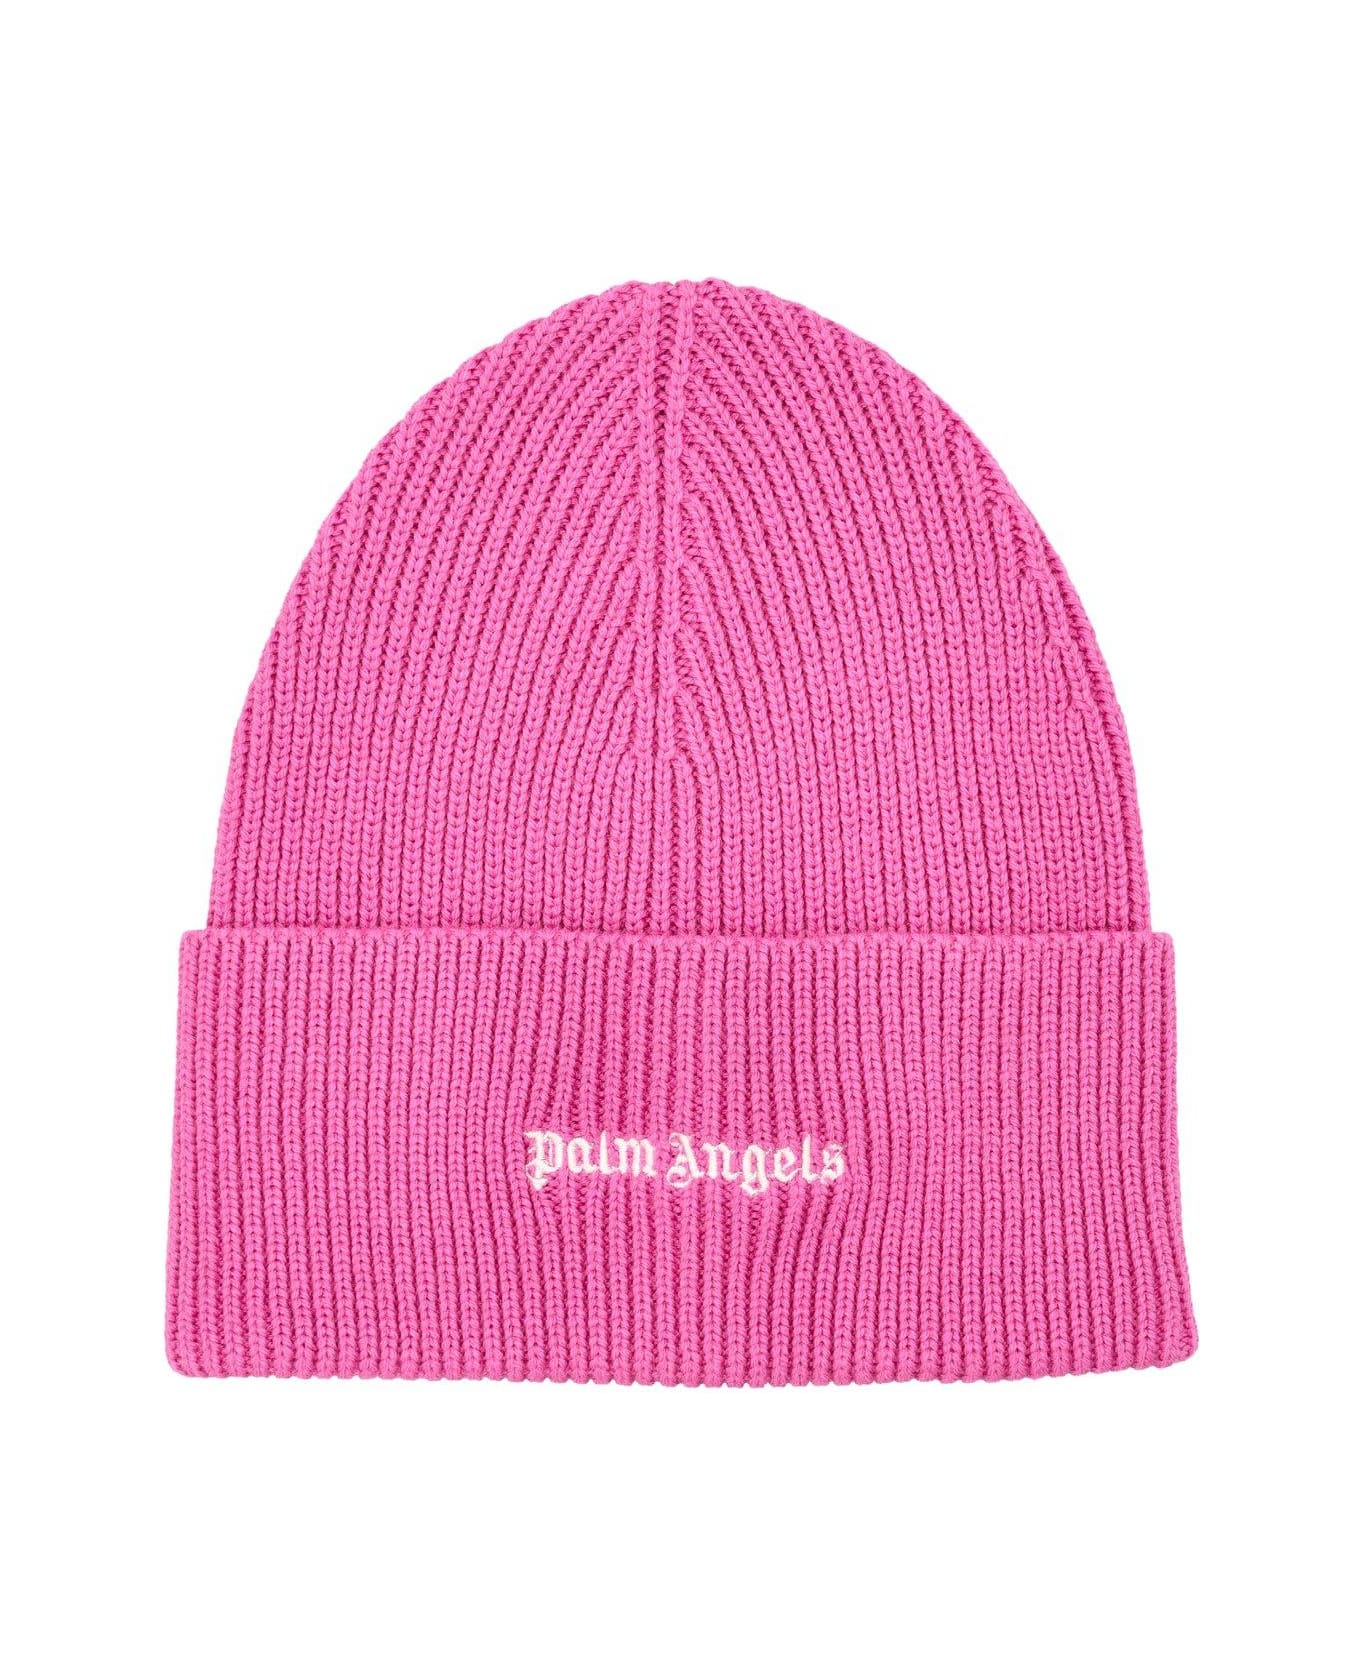 Palm Angels Logo Embroidered Ribbed-knit Beanie - FUCSIA